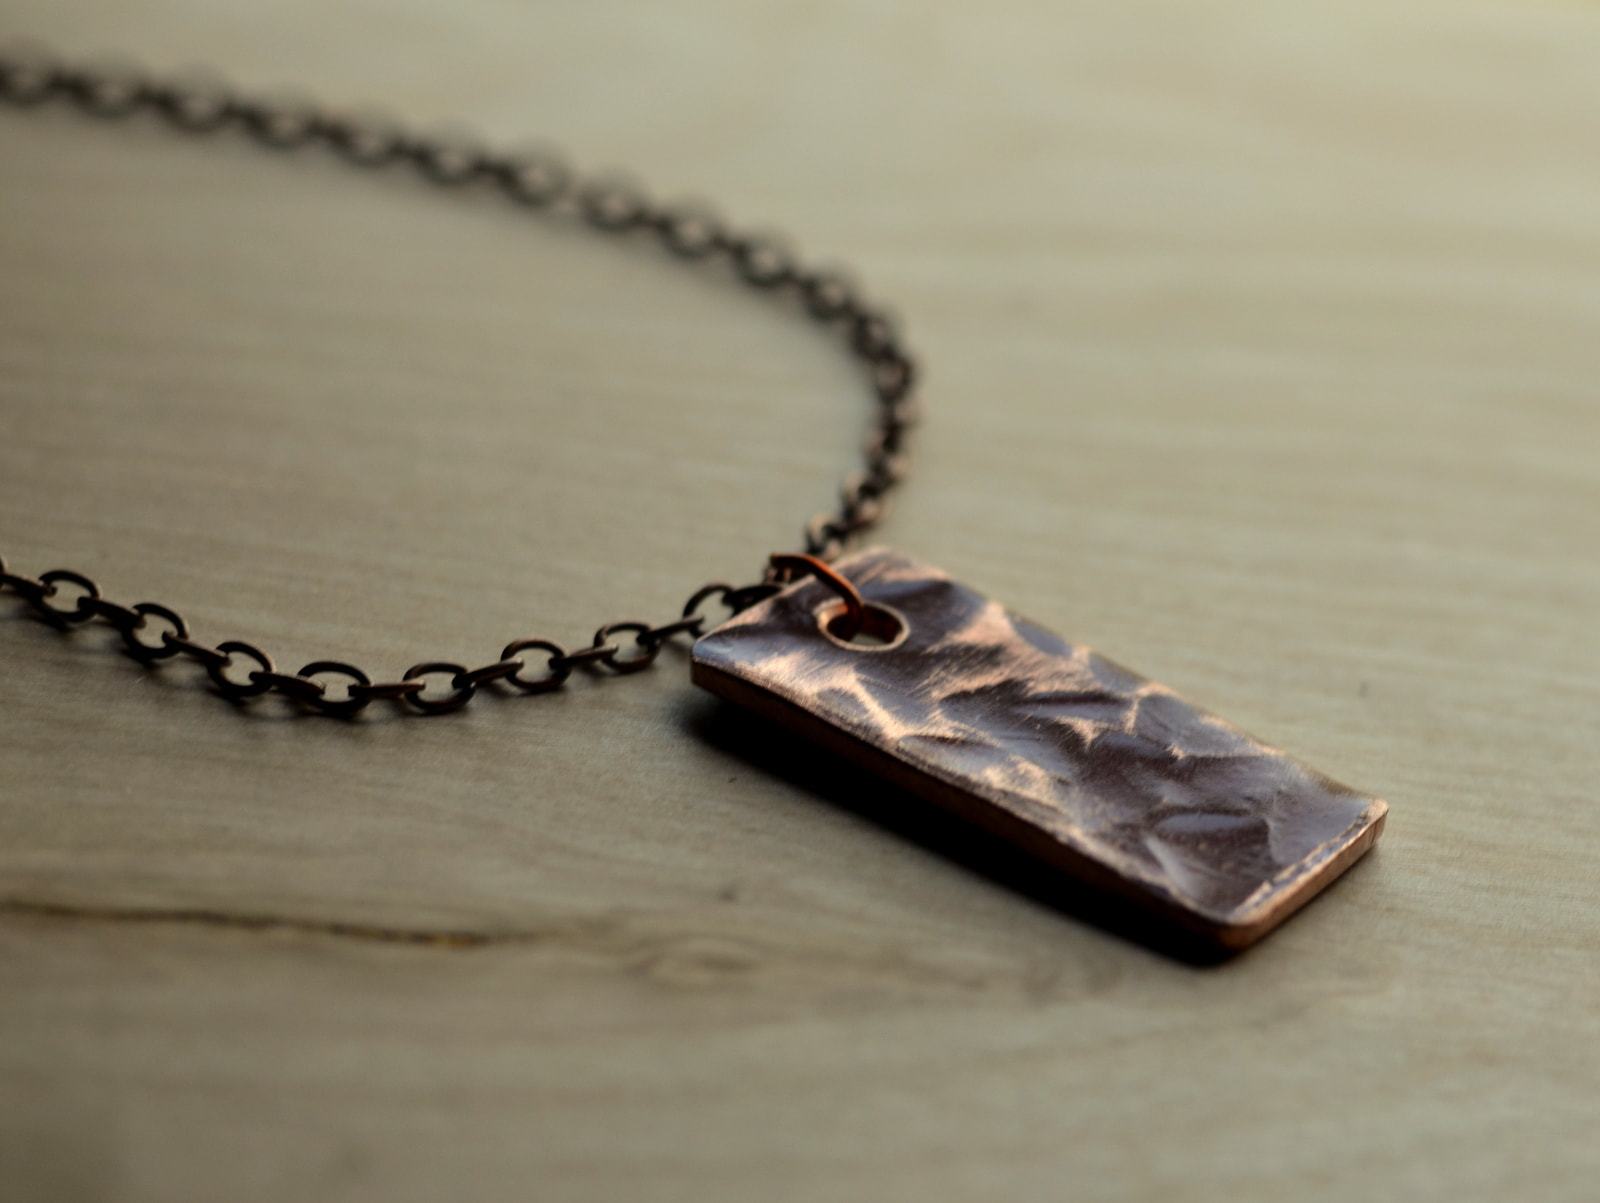 Hammered Copper Pendant and Necklace in Lightly Hammered Styling